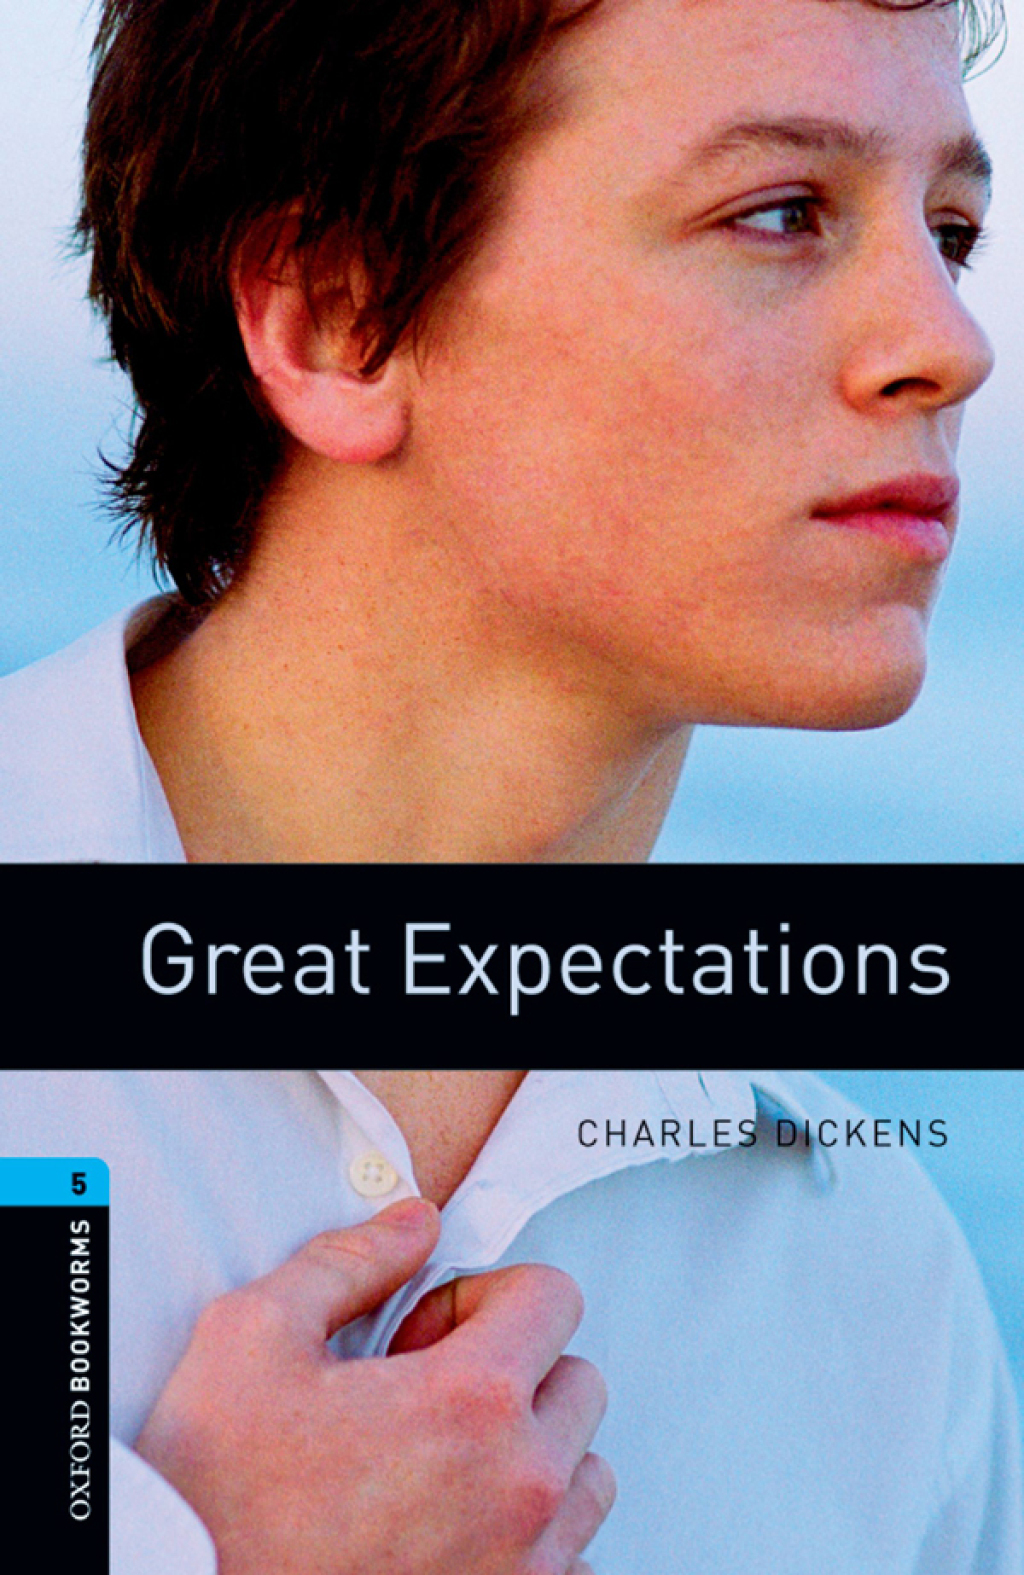 Great Expectations Level 5 Oxford Bookworms Library - 3rd Edition (eBook Rental)